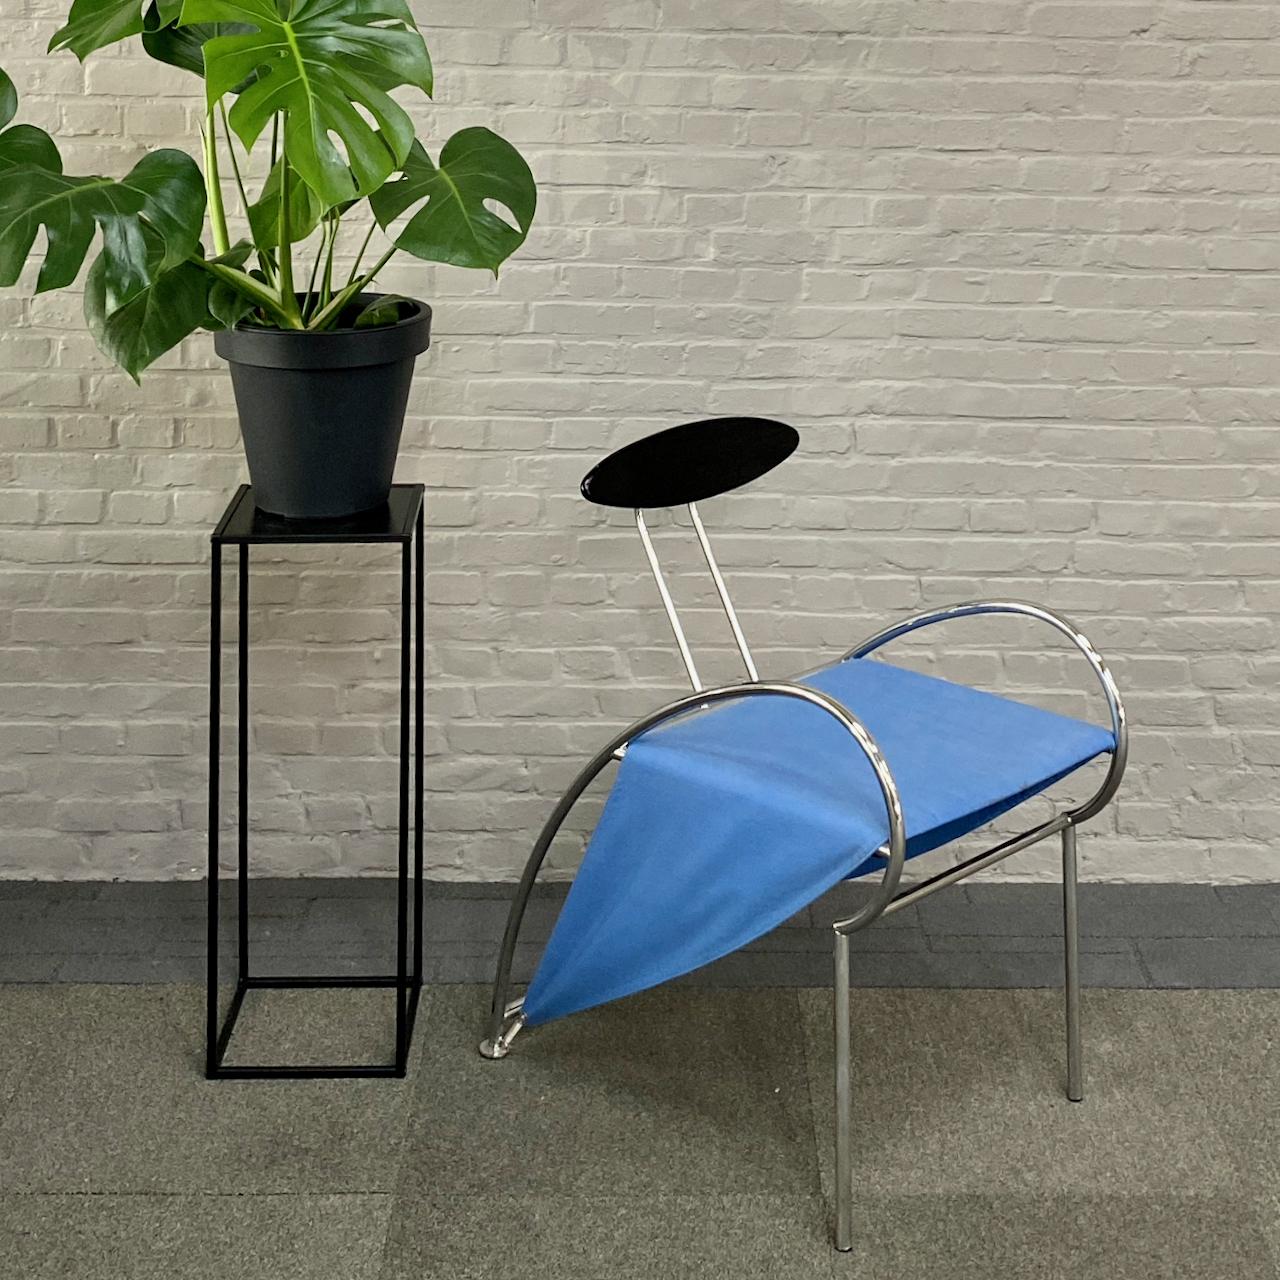 Post-Modern Massimi Iosa Ghini blue VELOX armchair for Moroso - Italy 1980'S For Sale